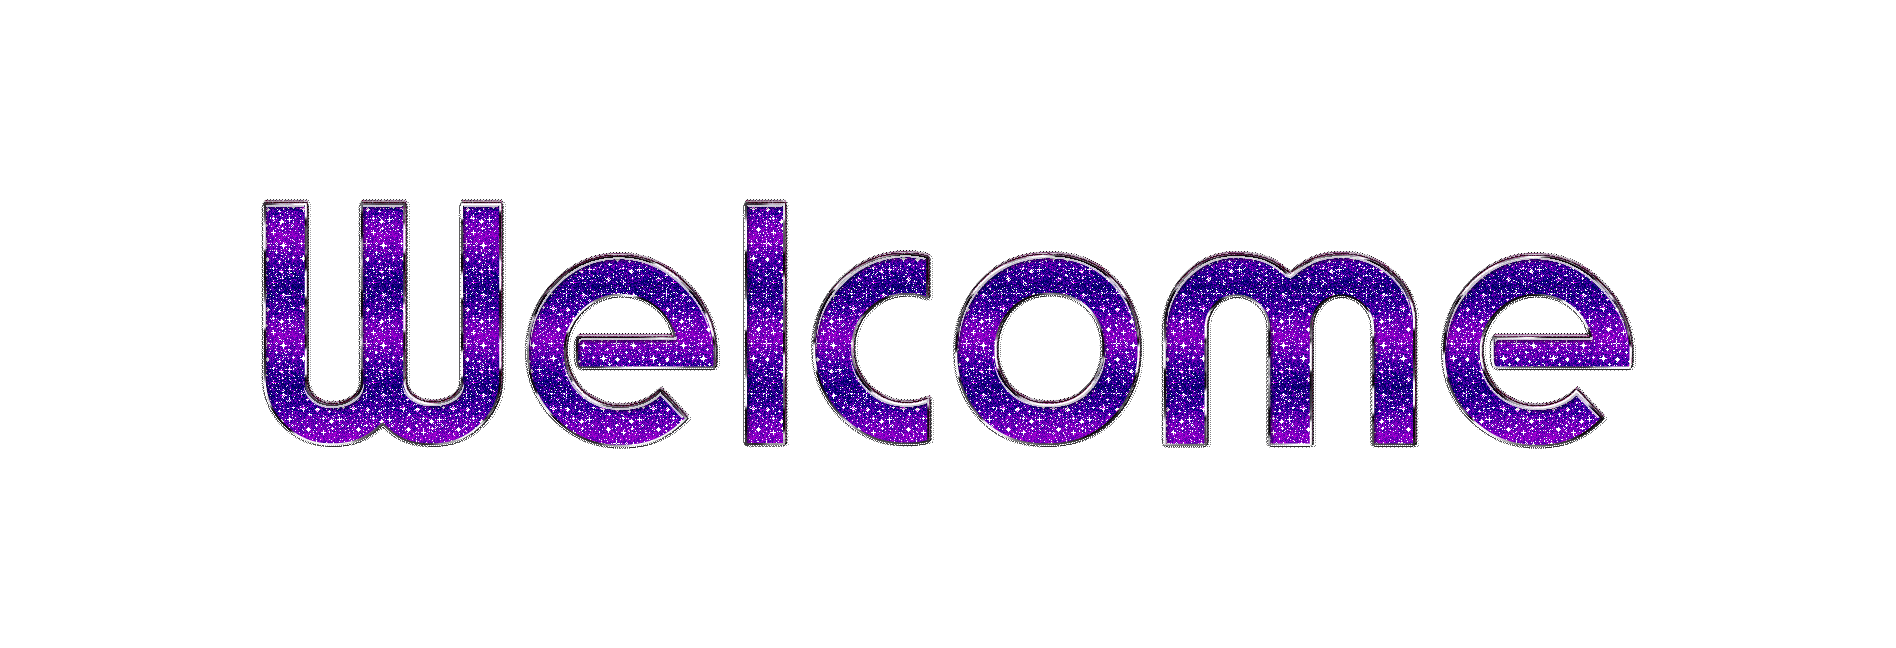 welcome_1_by_micatinistaa-d6r6l05.gif